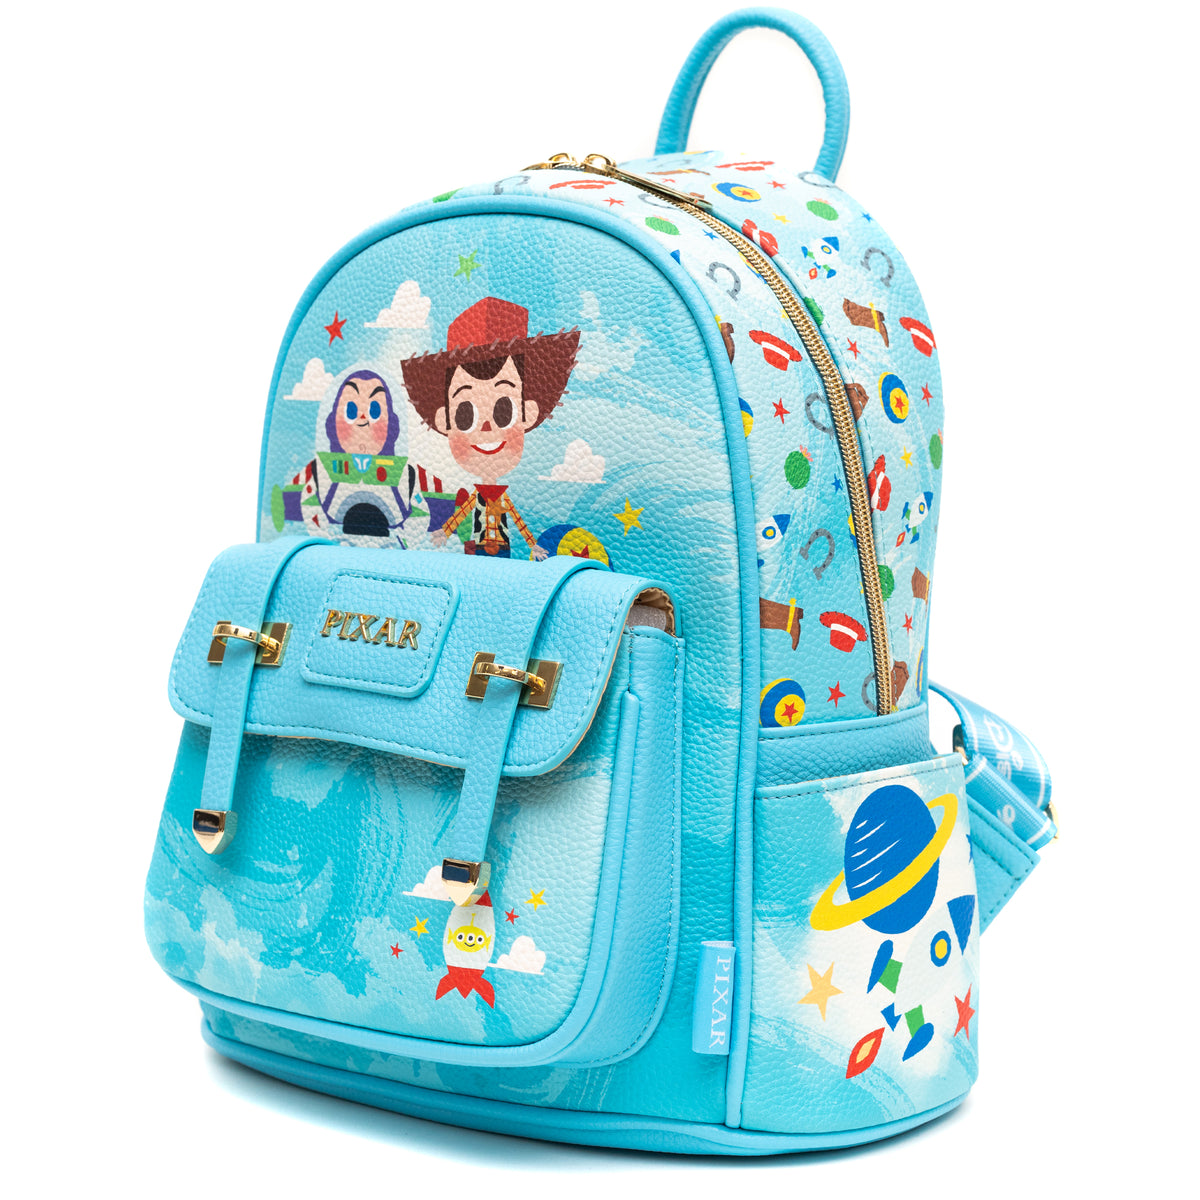 Disney Pixar Toy Story Mini Backpack - Limited Edition